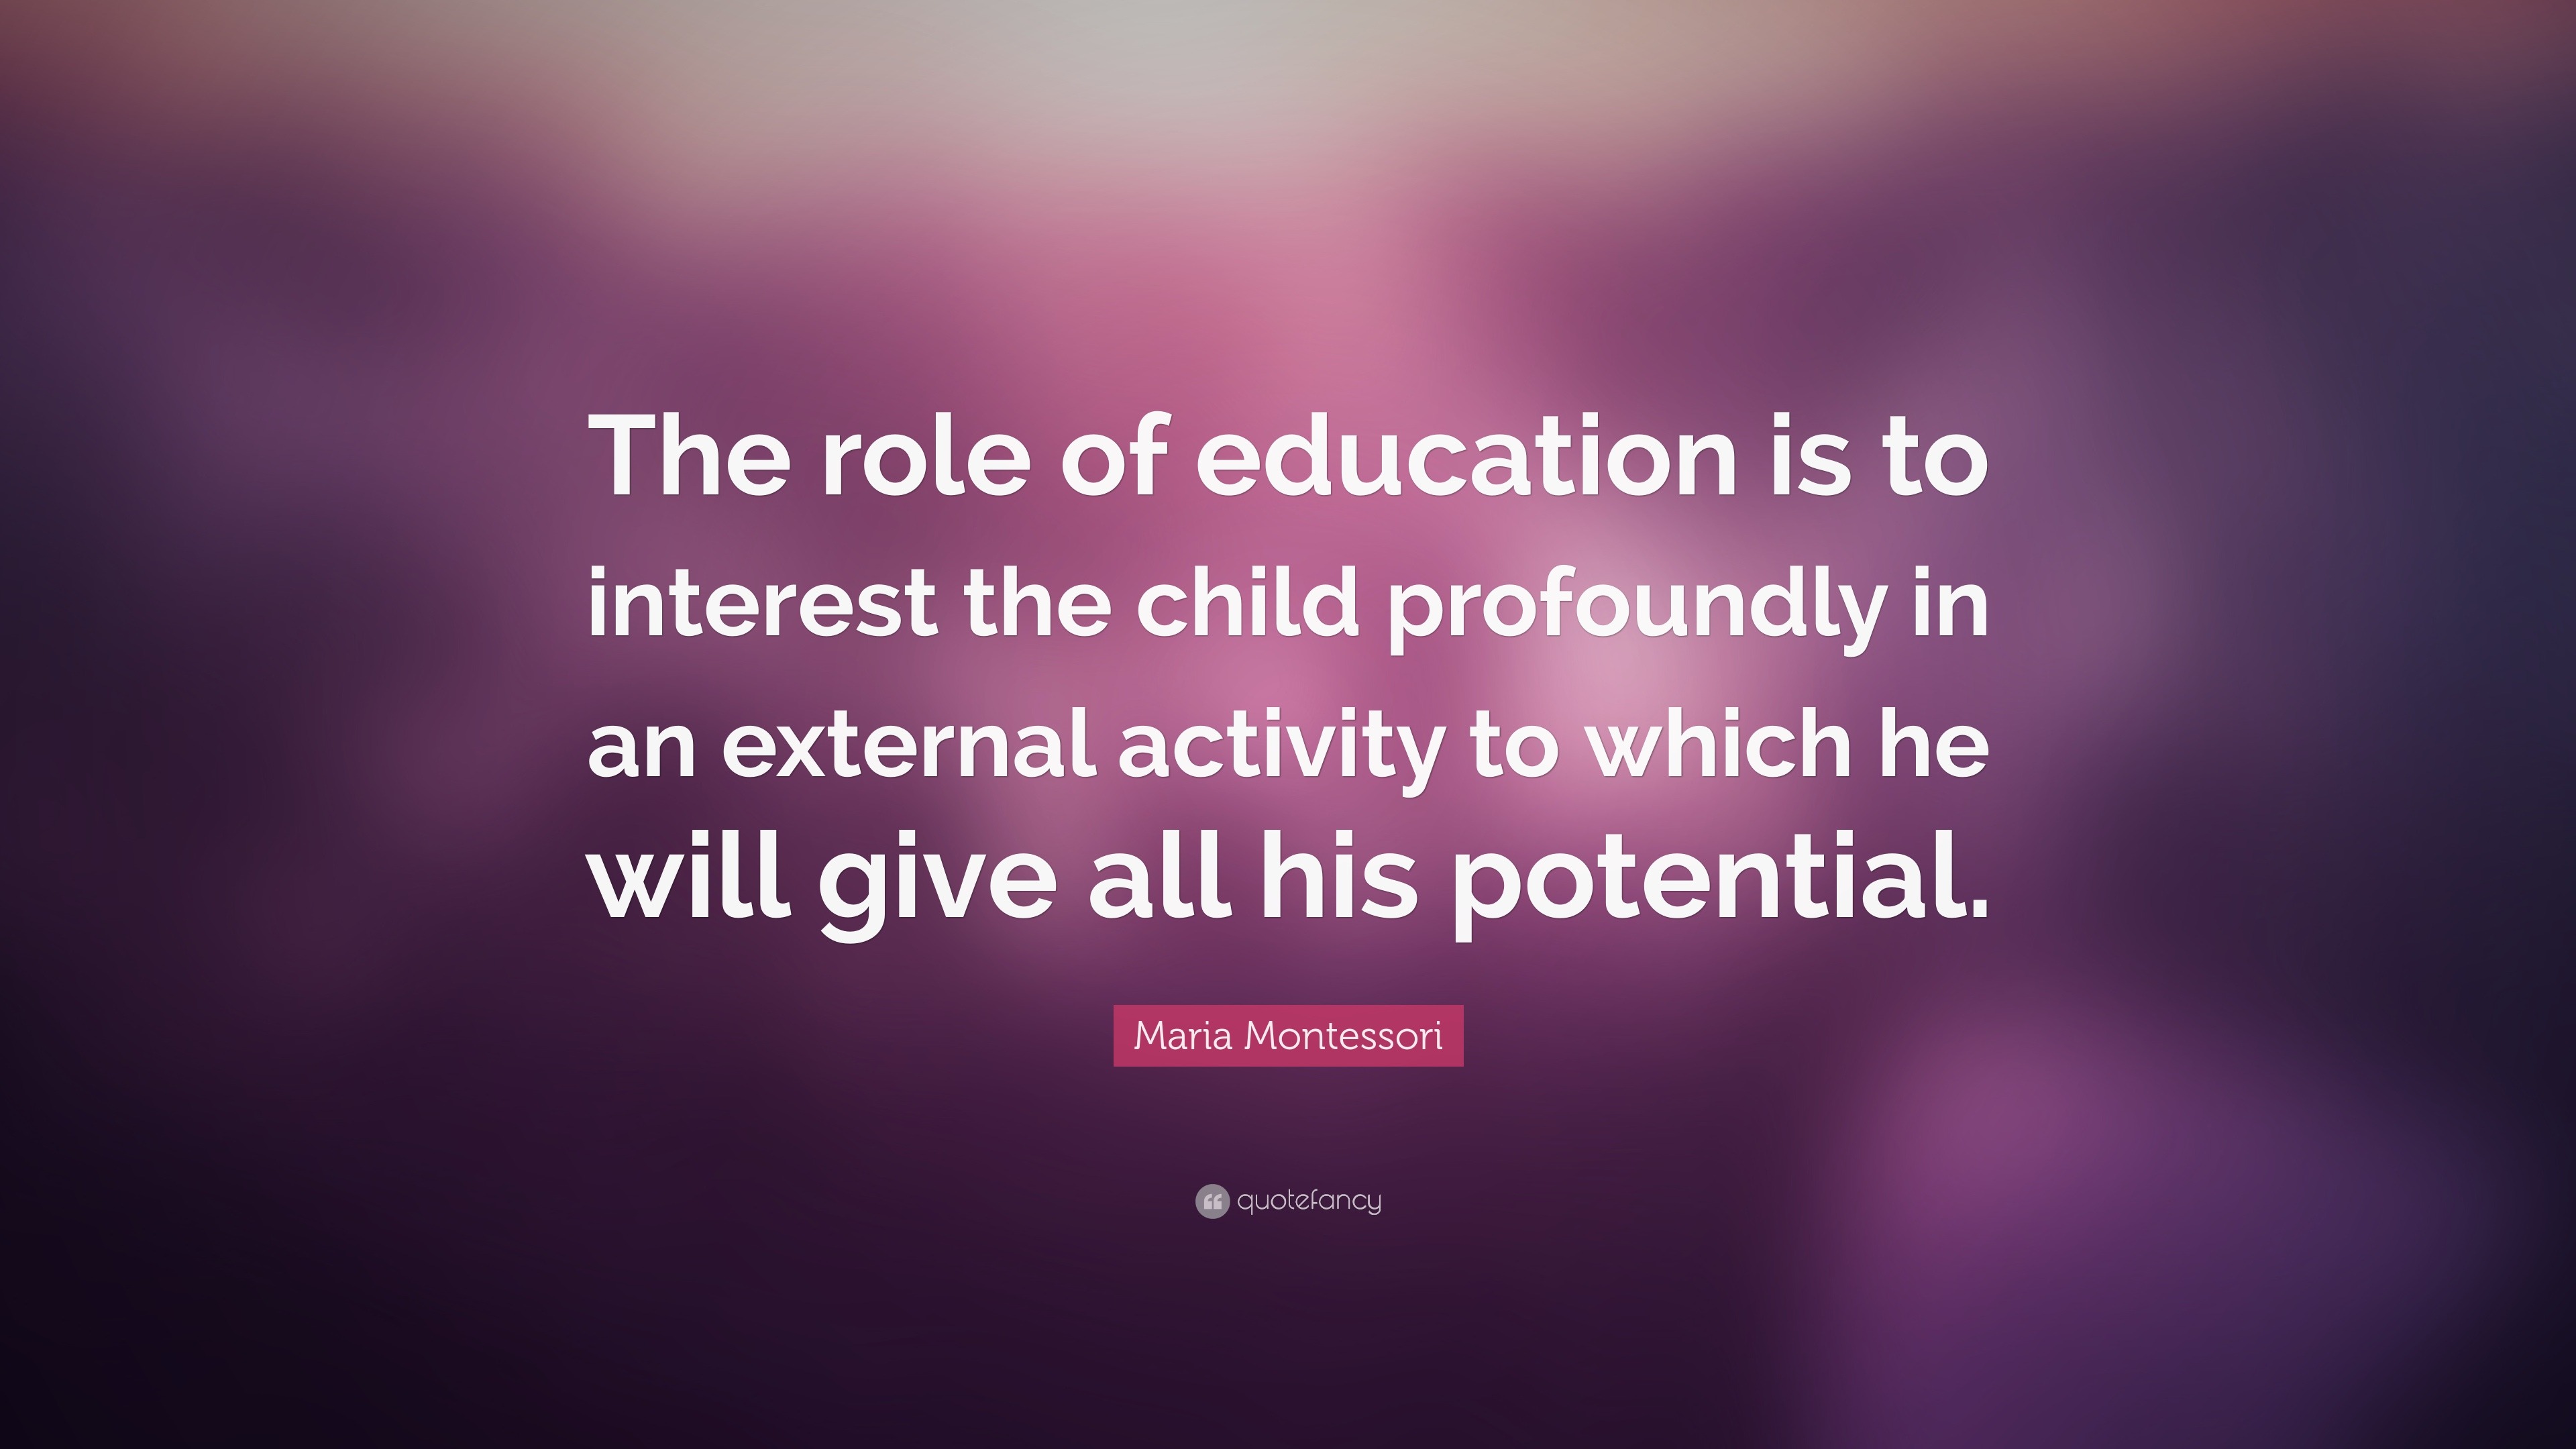 role of education